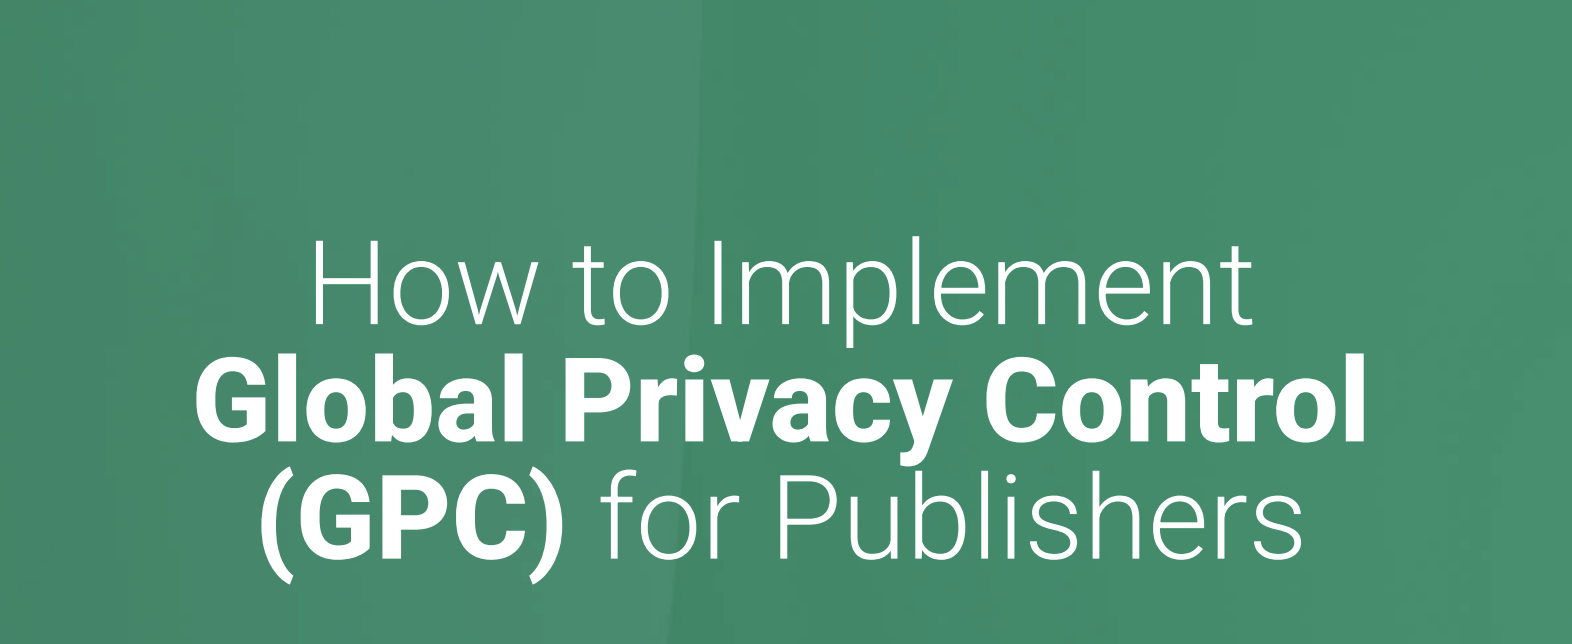 How to Implement Global Privacy Control (GPC) for Publishers written against green background.